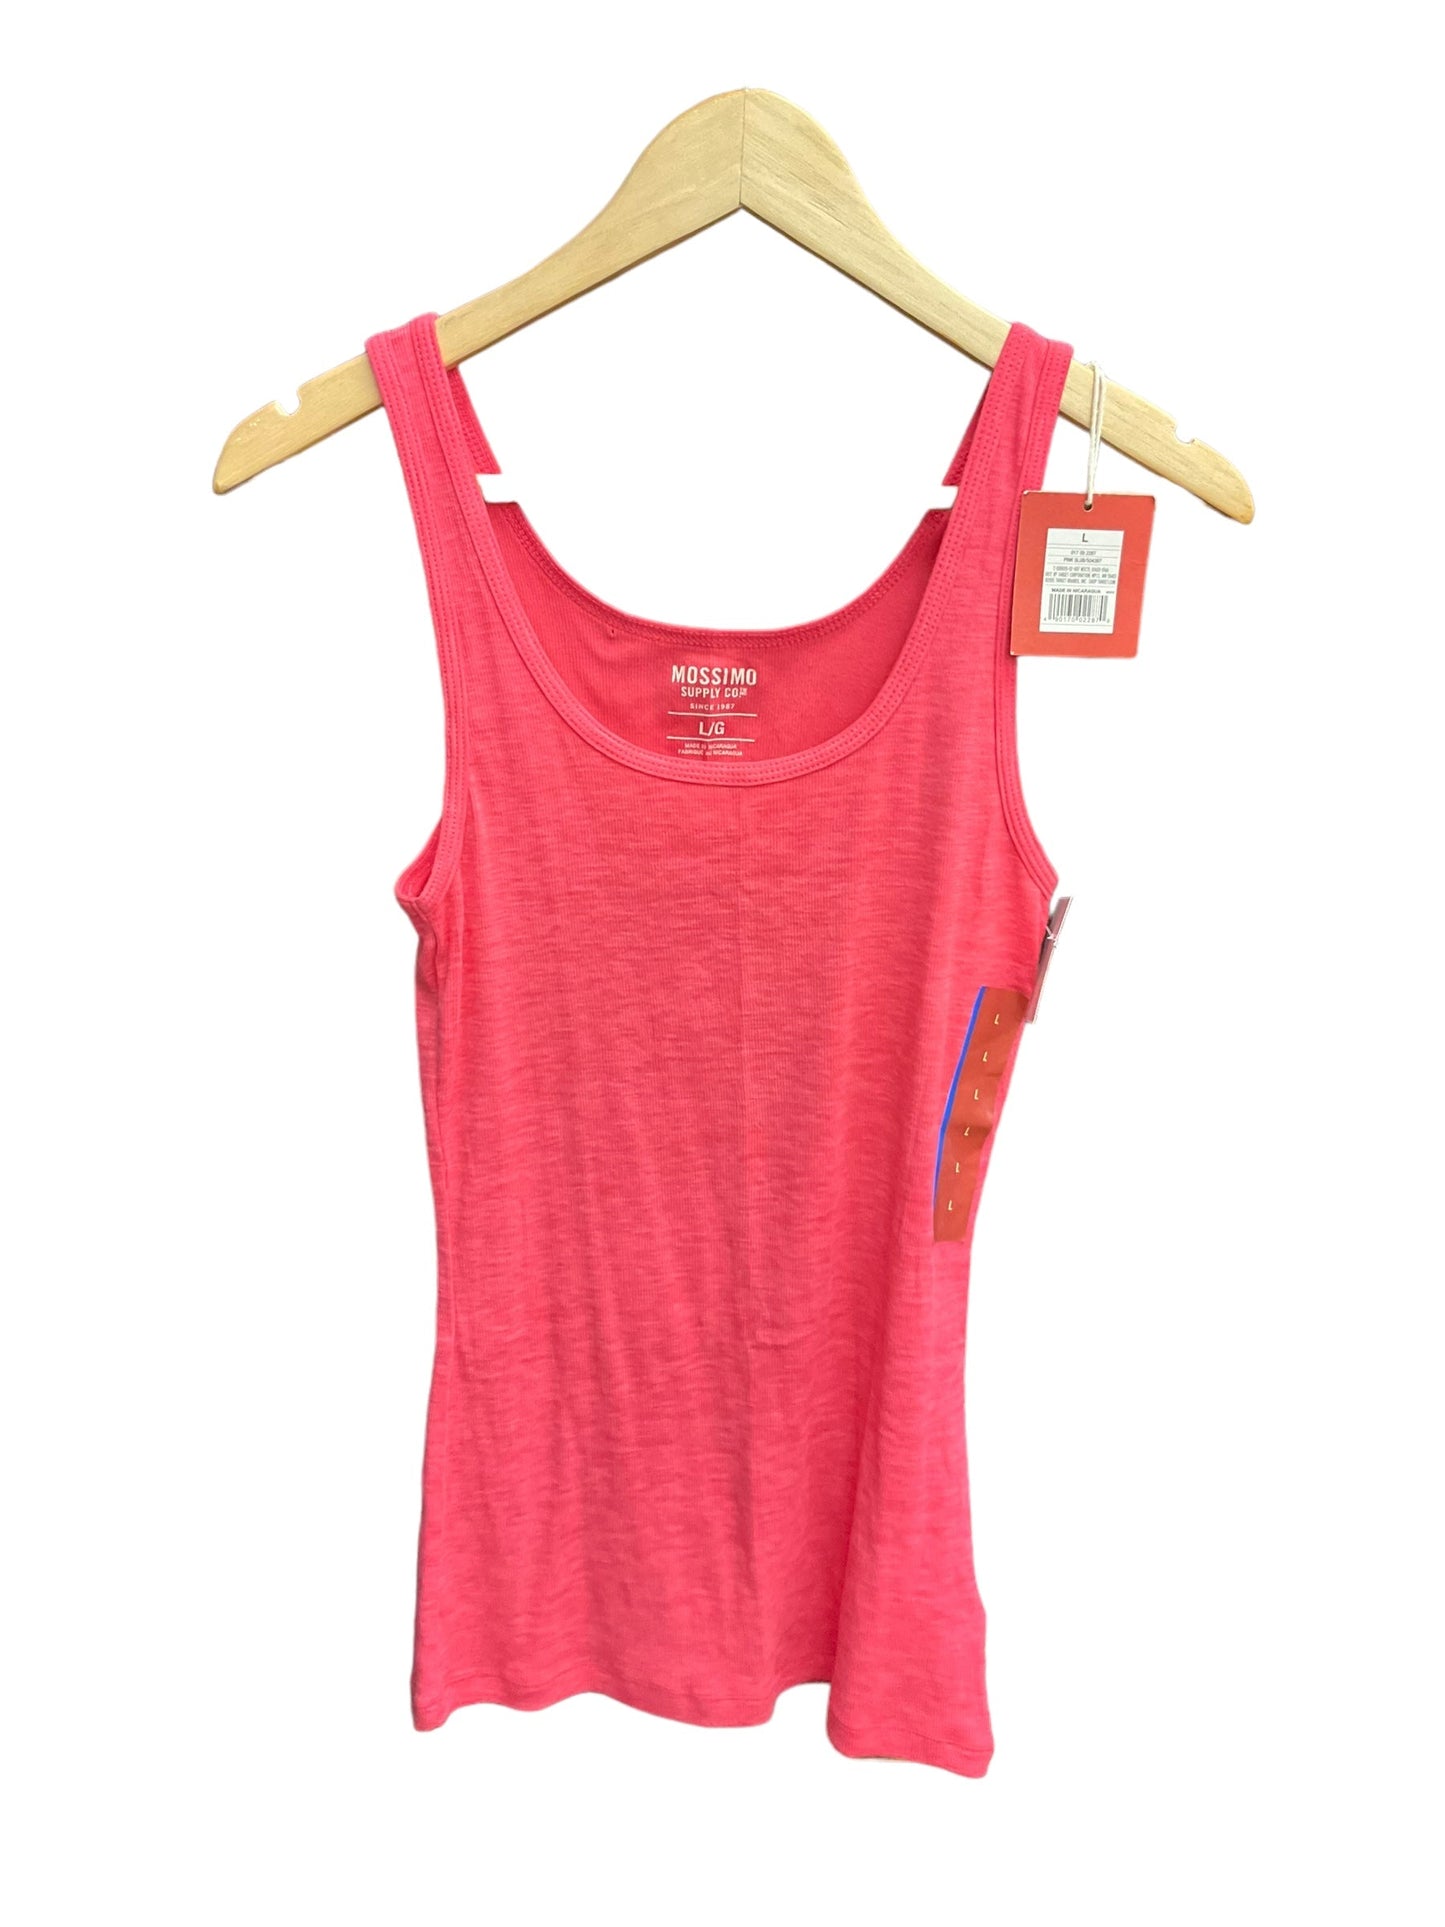 Pink Tank Top Mossimo, Size L